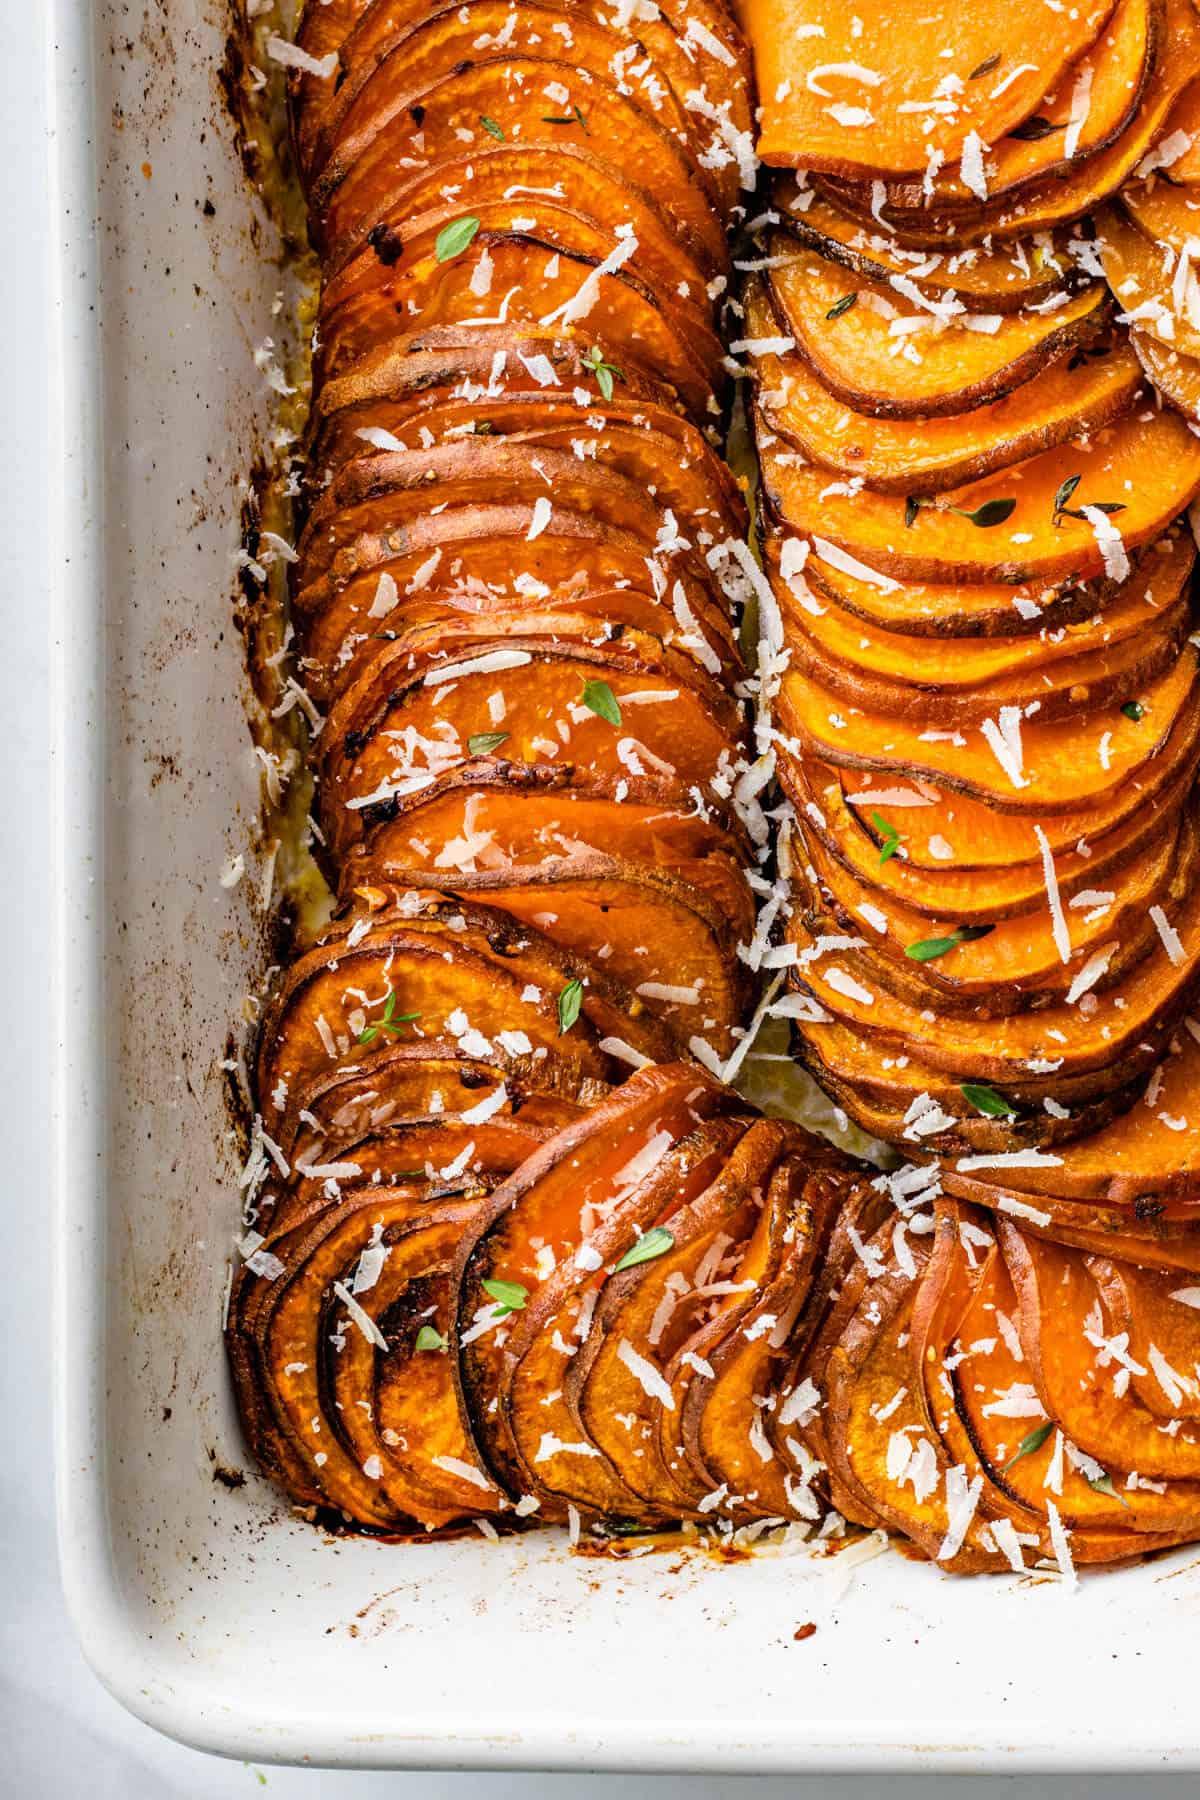 https://cookingwithayeh.com/wp-content/uploads/2021/12/Baked-Sweet-Potato-Slices-1.jpg